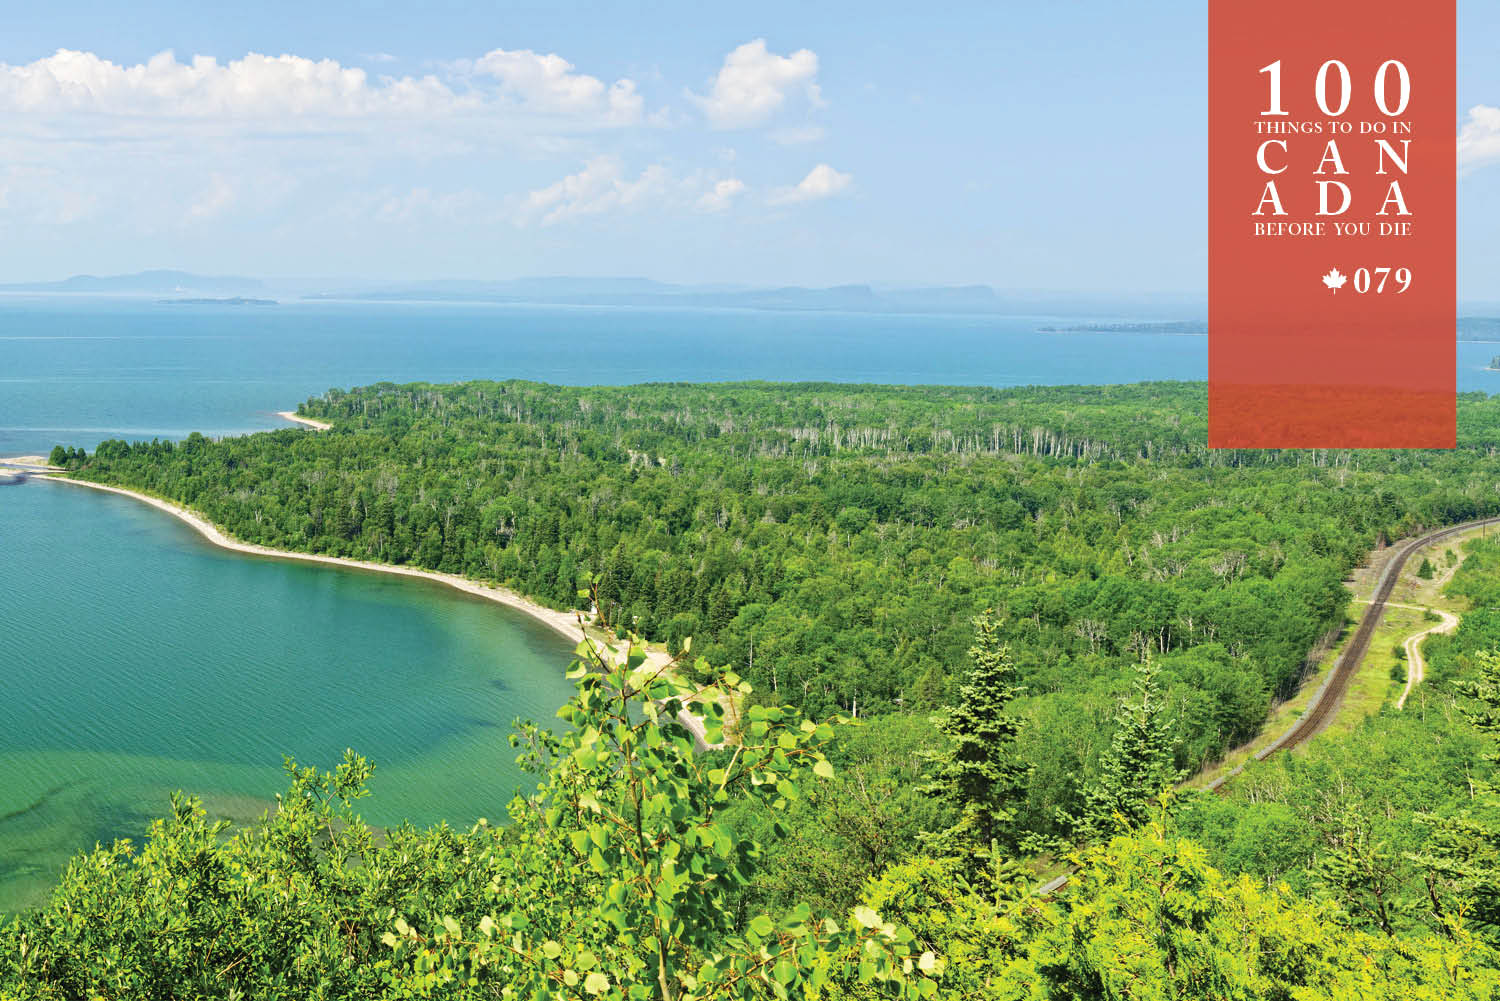 Fill up the tank for an iconic Lake Superior road trip